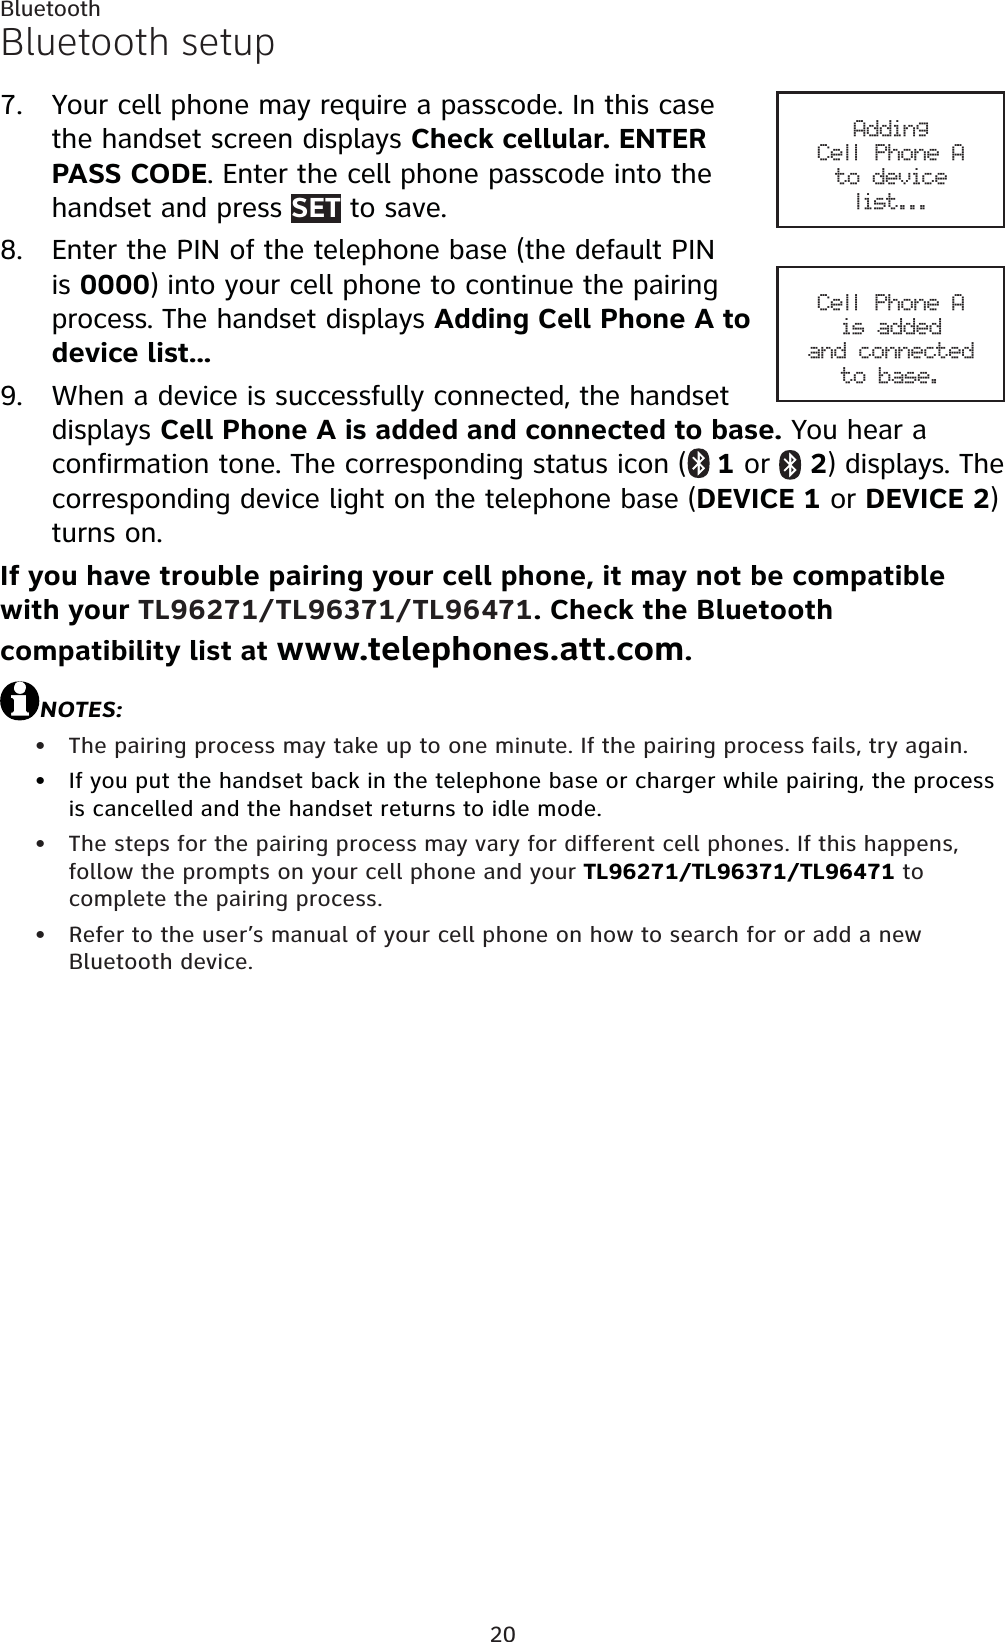 20BluetoothBluetooth setupYour cell phone may require a passcode. In this case the handset screen displays Check cellular. ENTER PASS CODE. Enter the cell phone passcode into the handset and press SET to save.Enter the PIN of the telephone base (the default PIN is 0000) into your cell phone to continue the pairing process. The handset displays Adding Cell Phone A to device list...When a device is successfully connected, the handset displays Cell Phone A is added and connected to base. You hear a confirmation tone. The corresponding status icon ( 1 or  2) displays. The corresponding device light on the telephone base (DEVICE 1 or DEVICE 2)turns on. If you have trouble pairing your cell phone, it may not be compatible with your TL96271/TL96371/TL96471. Check the Bluetooth compatibility list at www.telephones.att.com.NOTES:The pairing process may take up to one minute. If the pairing process fails, try again.If you put the handset back in the telephone base or charger while pairing, the process is cancelled and the handset returns to idle mode.The steps for the pairing process may vary for different cell phones. If this happens, follow the prompts on your cell phone and your TL96271/TL96371/TL96471 to complete the pairing process.Refer to the user’s manual of your cell phone on how to search for or add a new Bluetooth device.7.8.9.••••Adding Cell Phone Ato device list...Cell Phone Ais added and connectedto base.